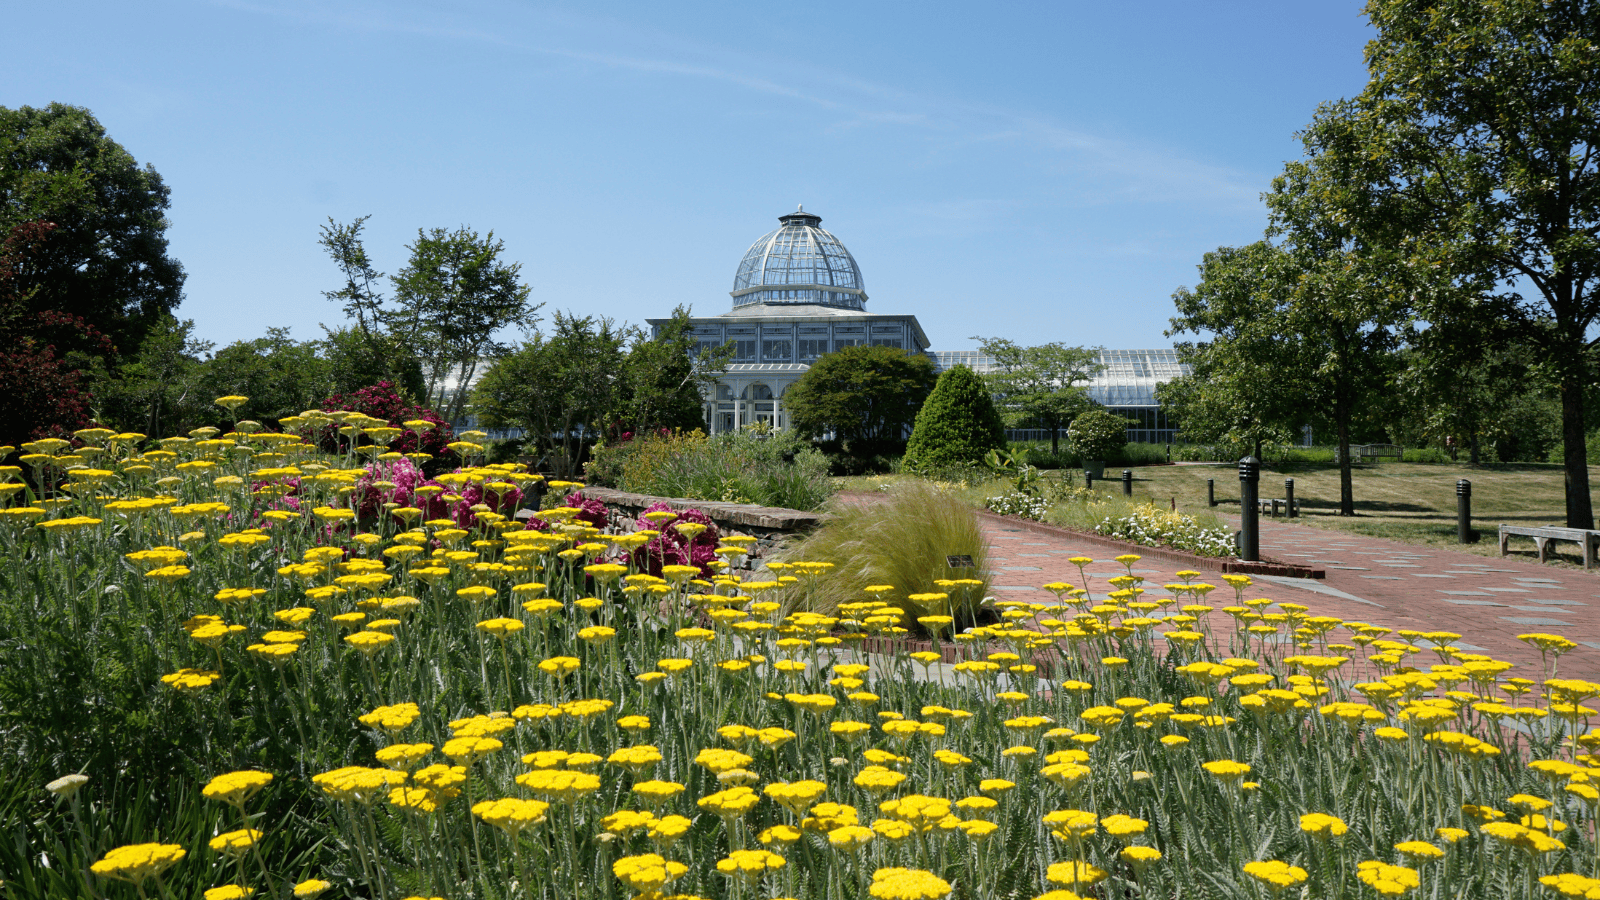 <p>Recognized as one of the country’s top nature areas, <a href="https://www.lewisginter.org/" rel="nofollow external noopener noreferrer">Lewis Ginter Botanical Garden</a> is an essential destination for plant lovers. Since 1984, the gardens have welcomed visitors to its themed gardens and parks. You could spend hours exploring the opulent conservatory, romantic cherry tree walk, and kid-friendly children’s garden. </p>